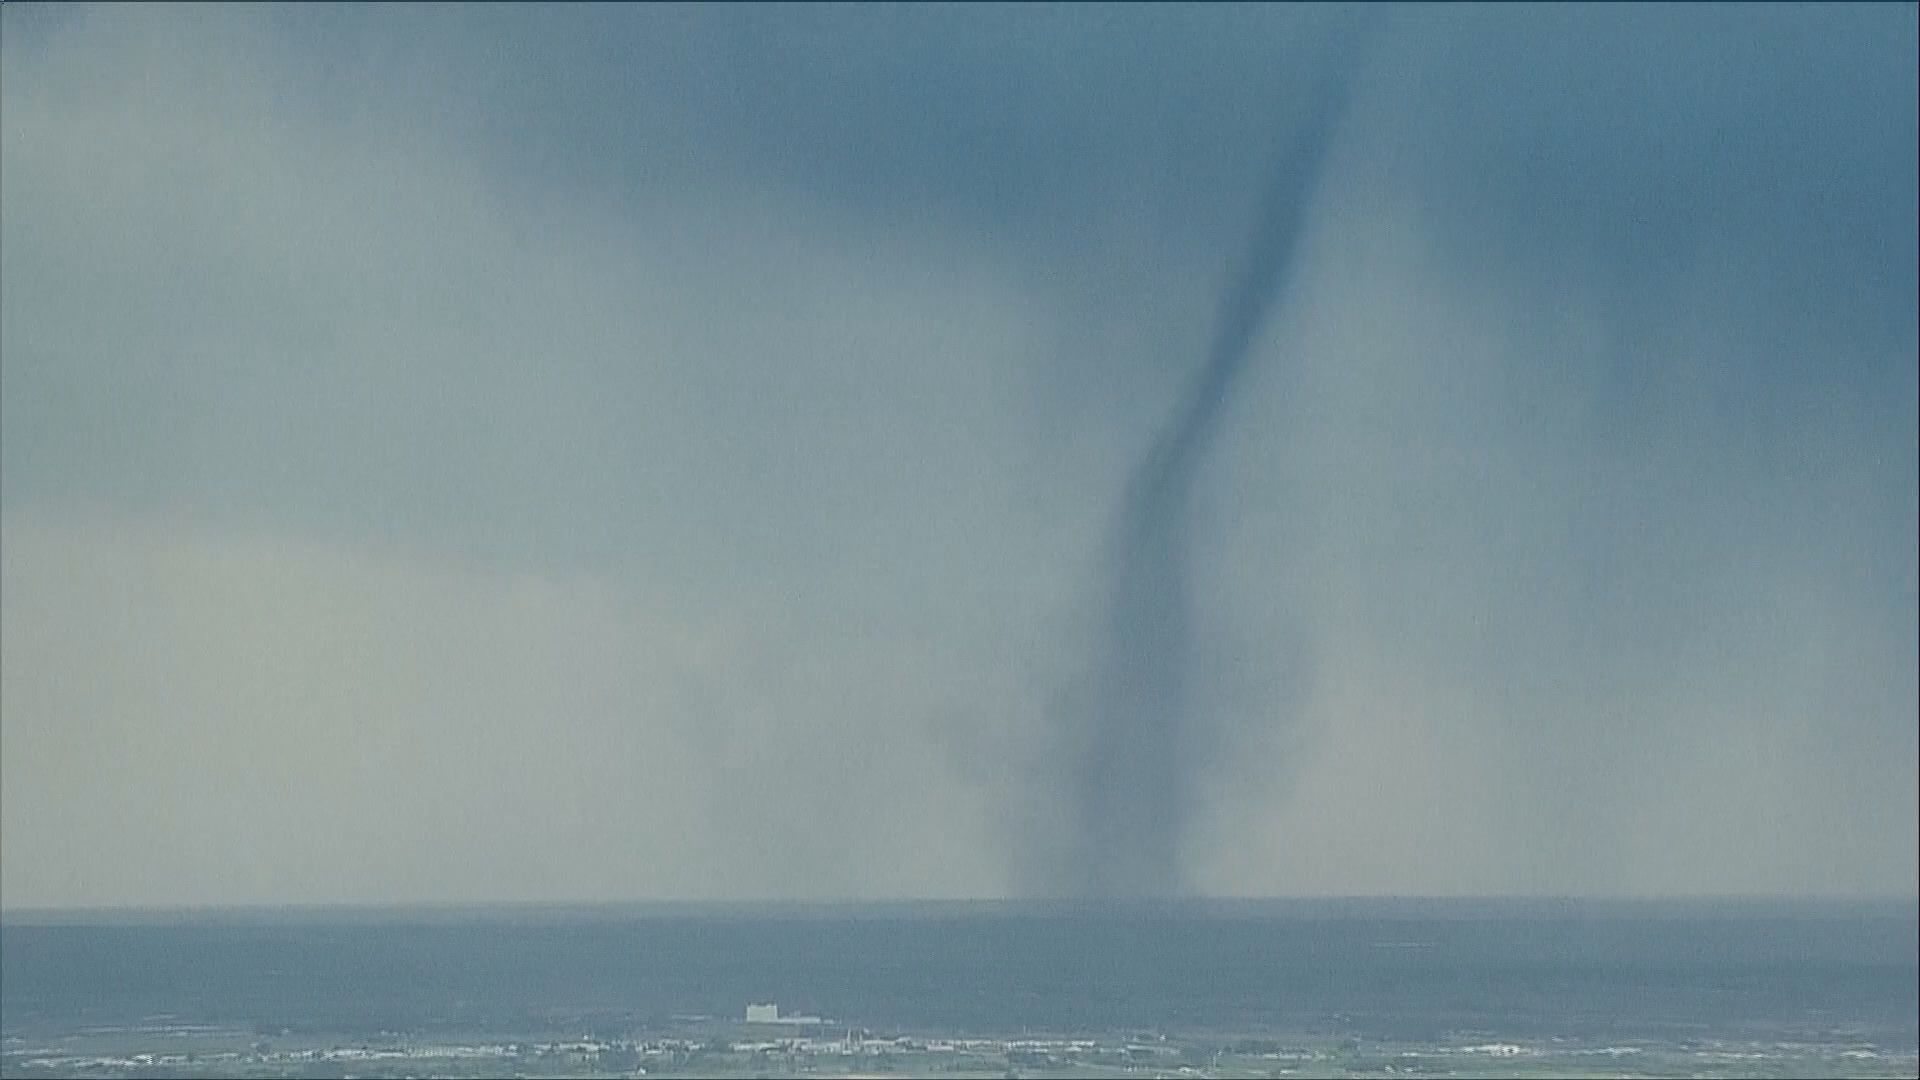 A landspout tornado touched down near Firestone and Mead in northern Colorado Monday afternoon. This is video from SKY9 soon after it formed.